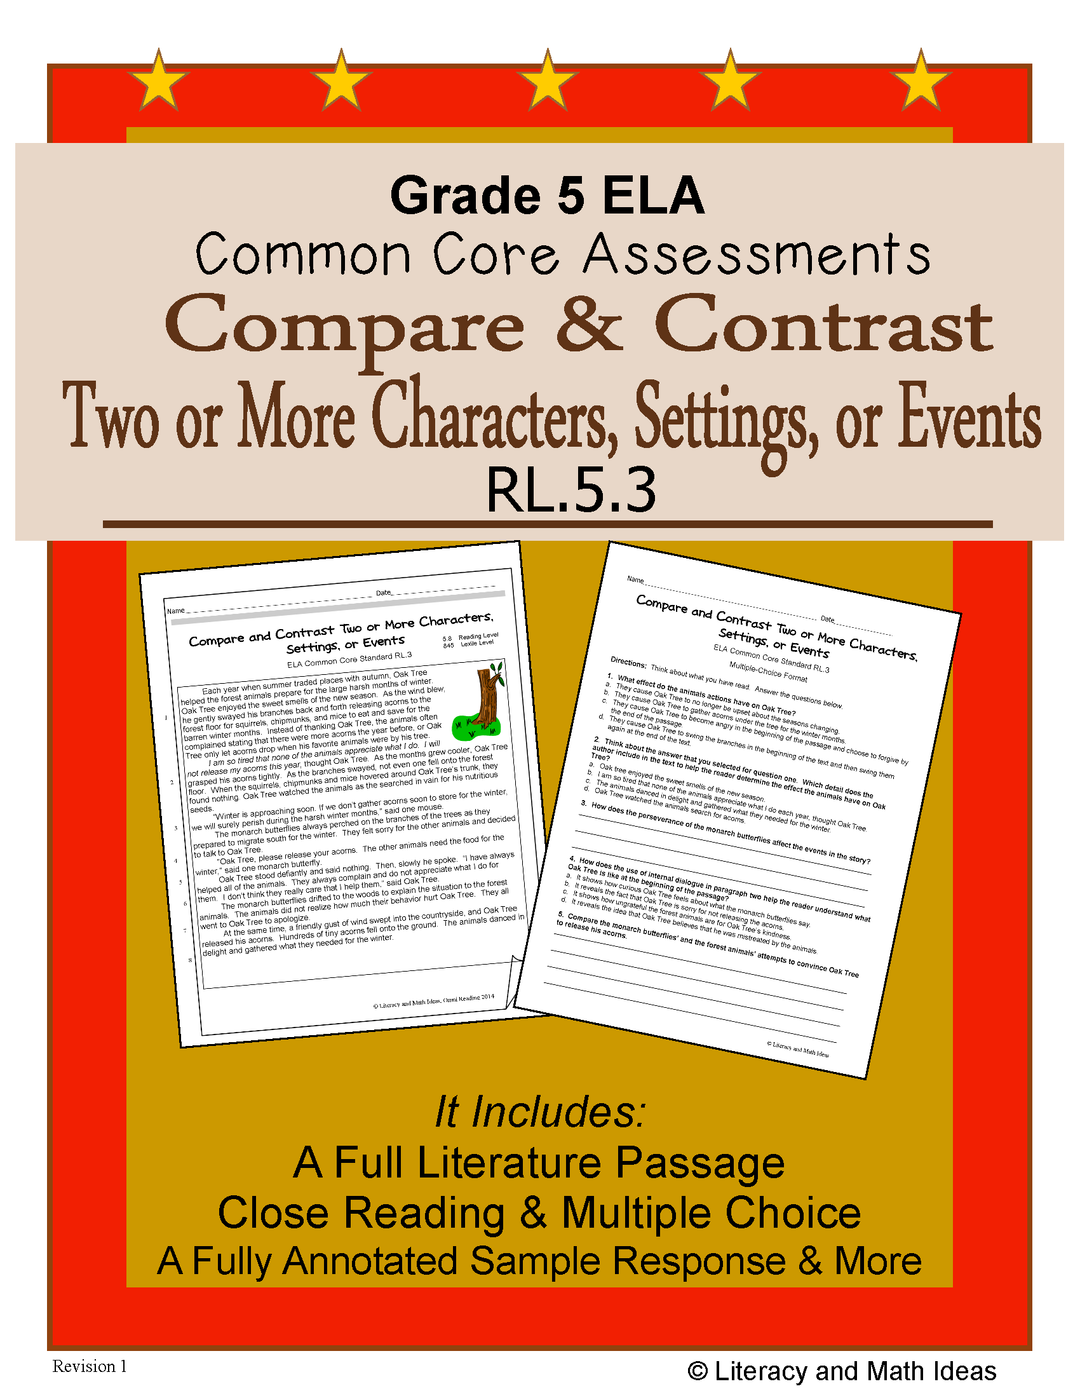 Grade 5 Common Core Assessments: Characters & Events RL.5.3